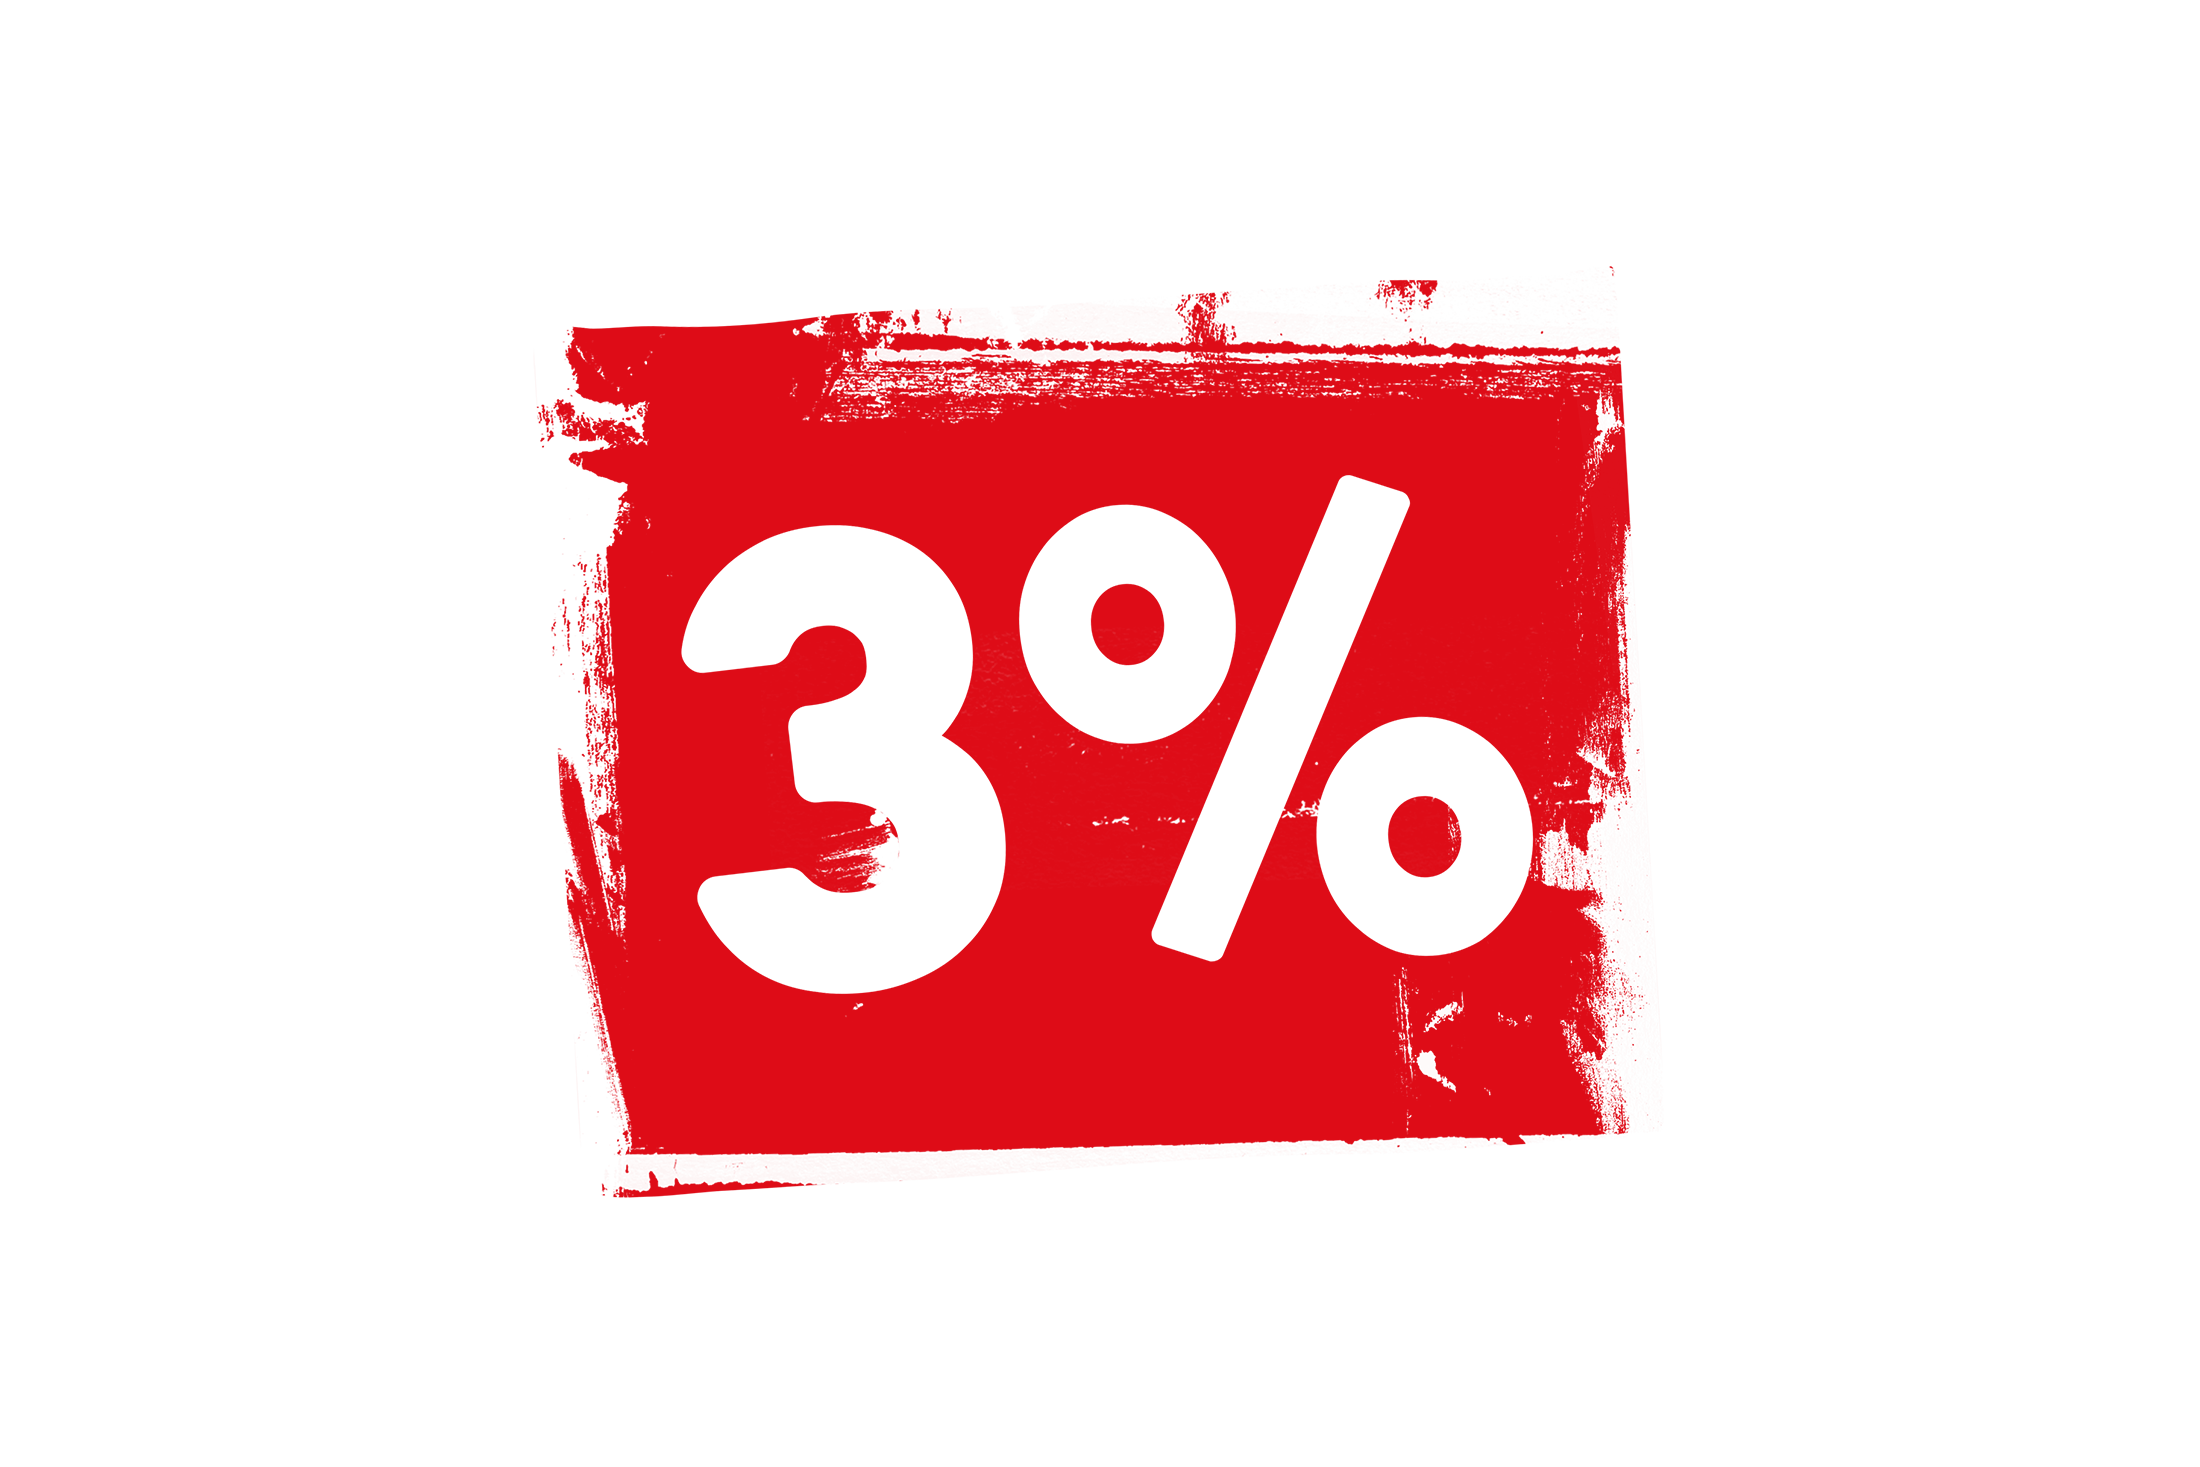 Grunge 3 percent label PNG and PSD